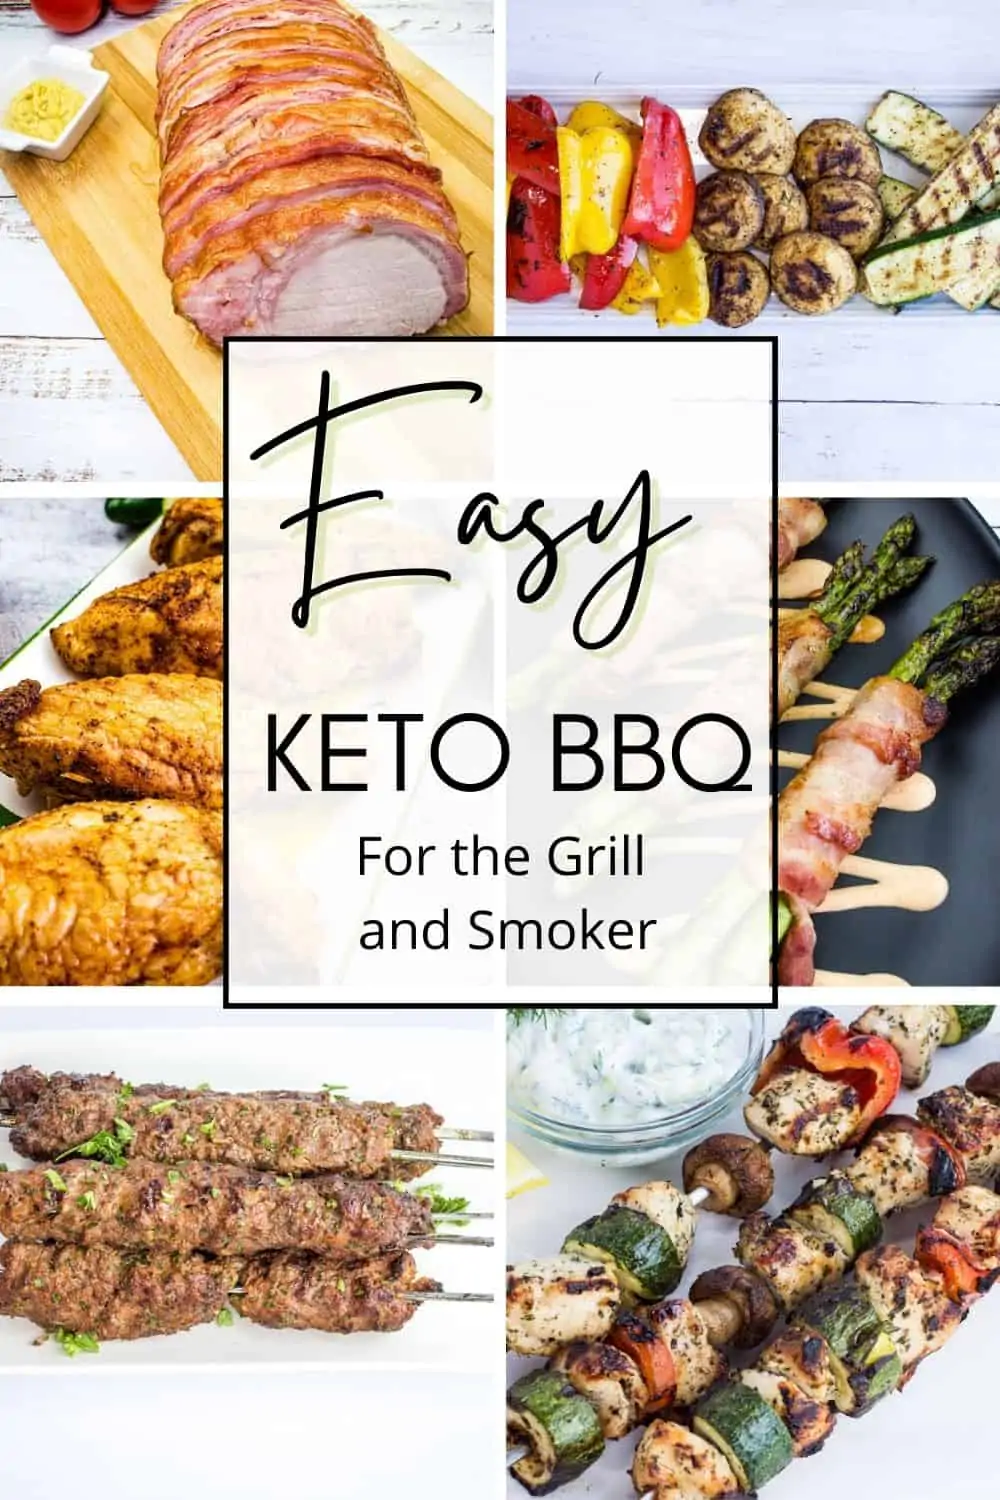 Lodge kickoff grill review  Grilling, Grill time, Keto recipes